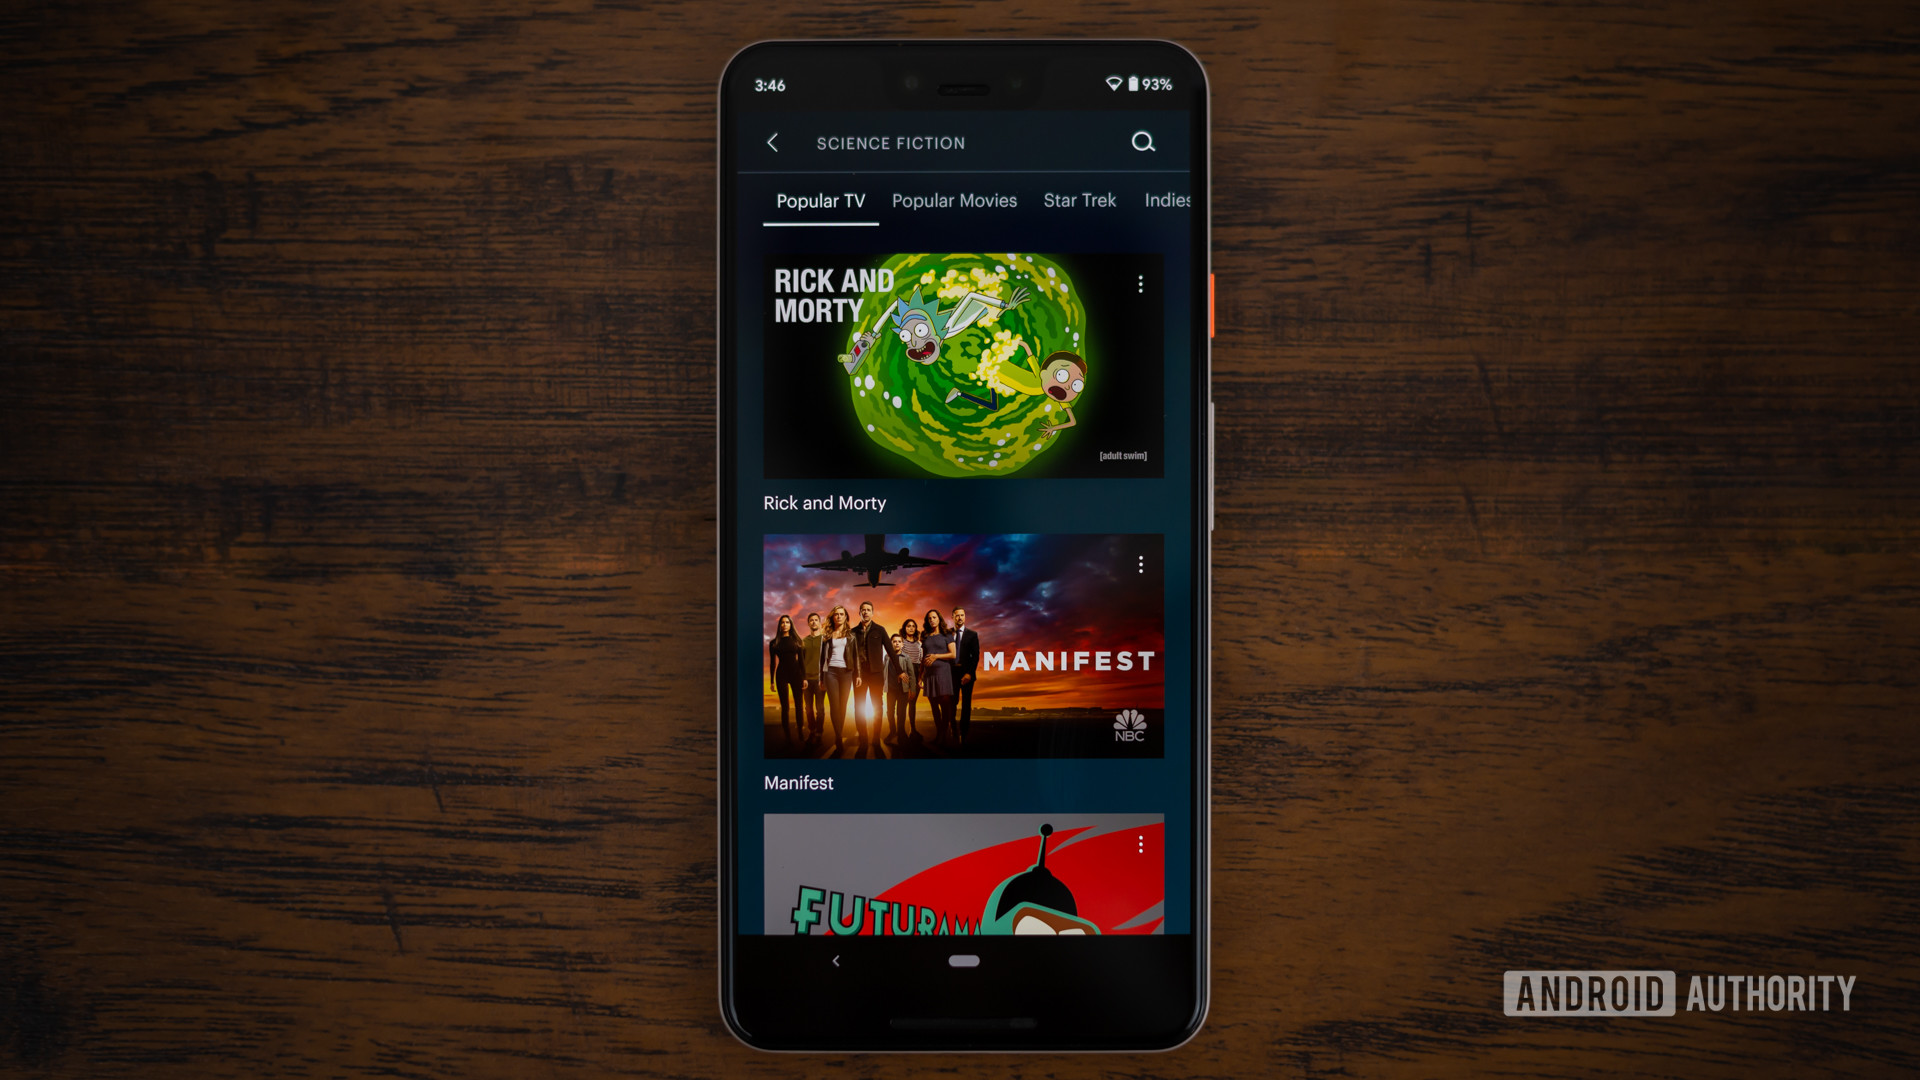 Hulu Science Fiction section appears on smartphone